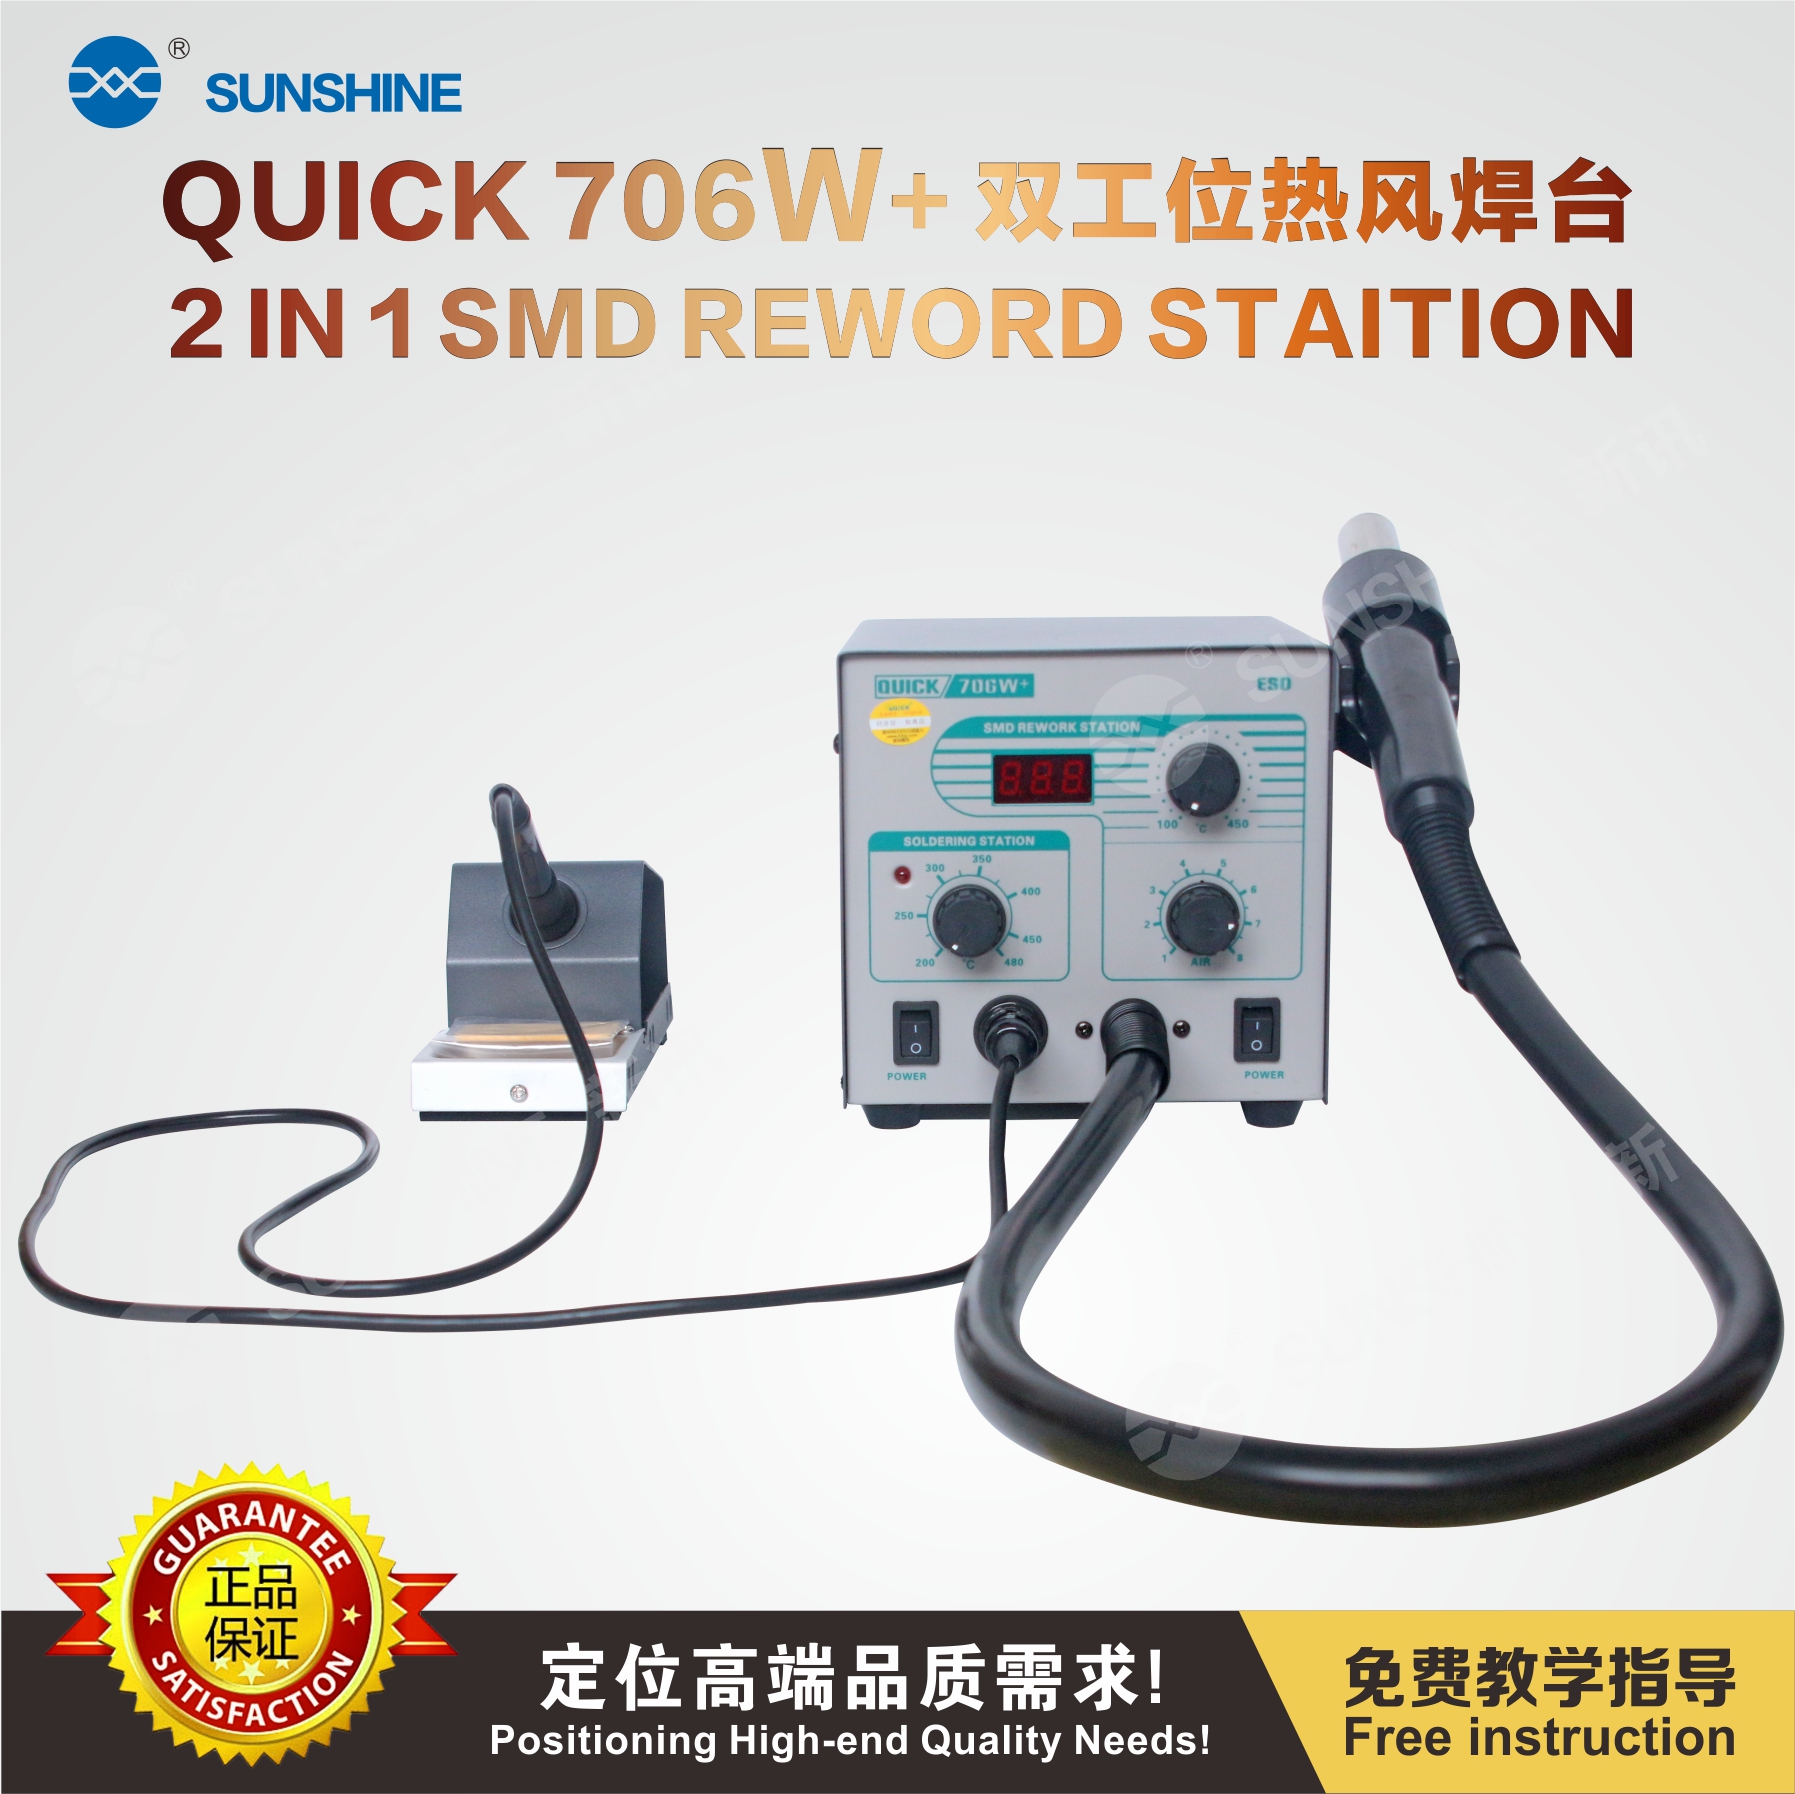 QUICK 706W+ 2 in 1 Rework and soldering station   QUICK 706W+ 2 in 1 Rework and soldering station    